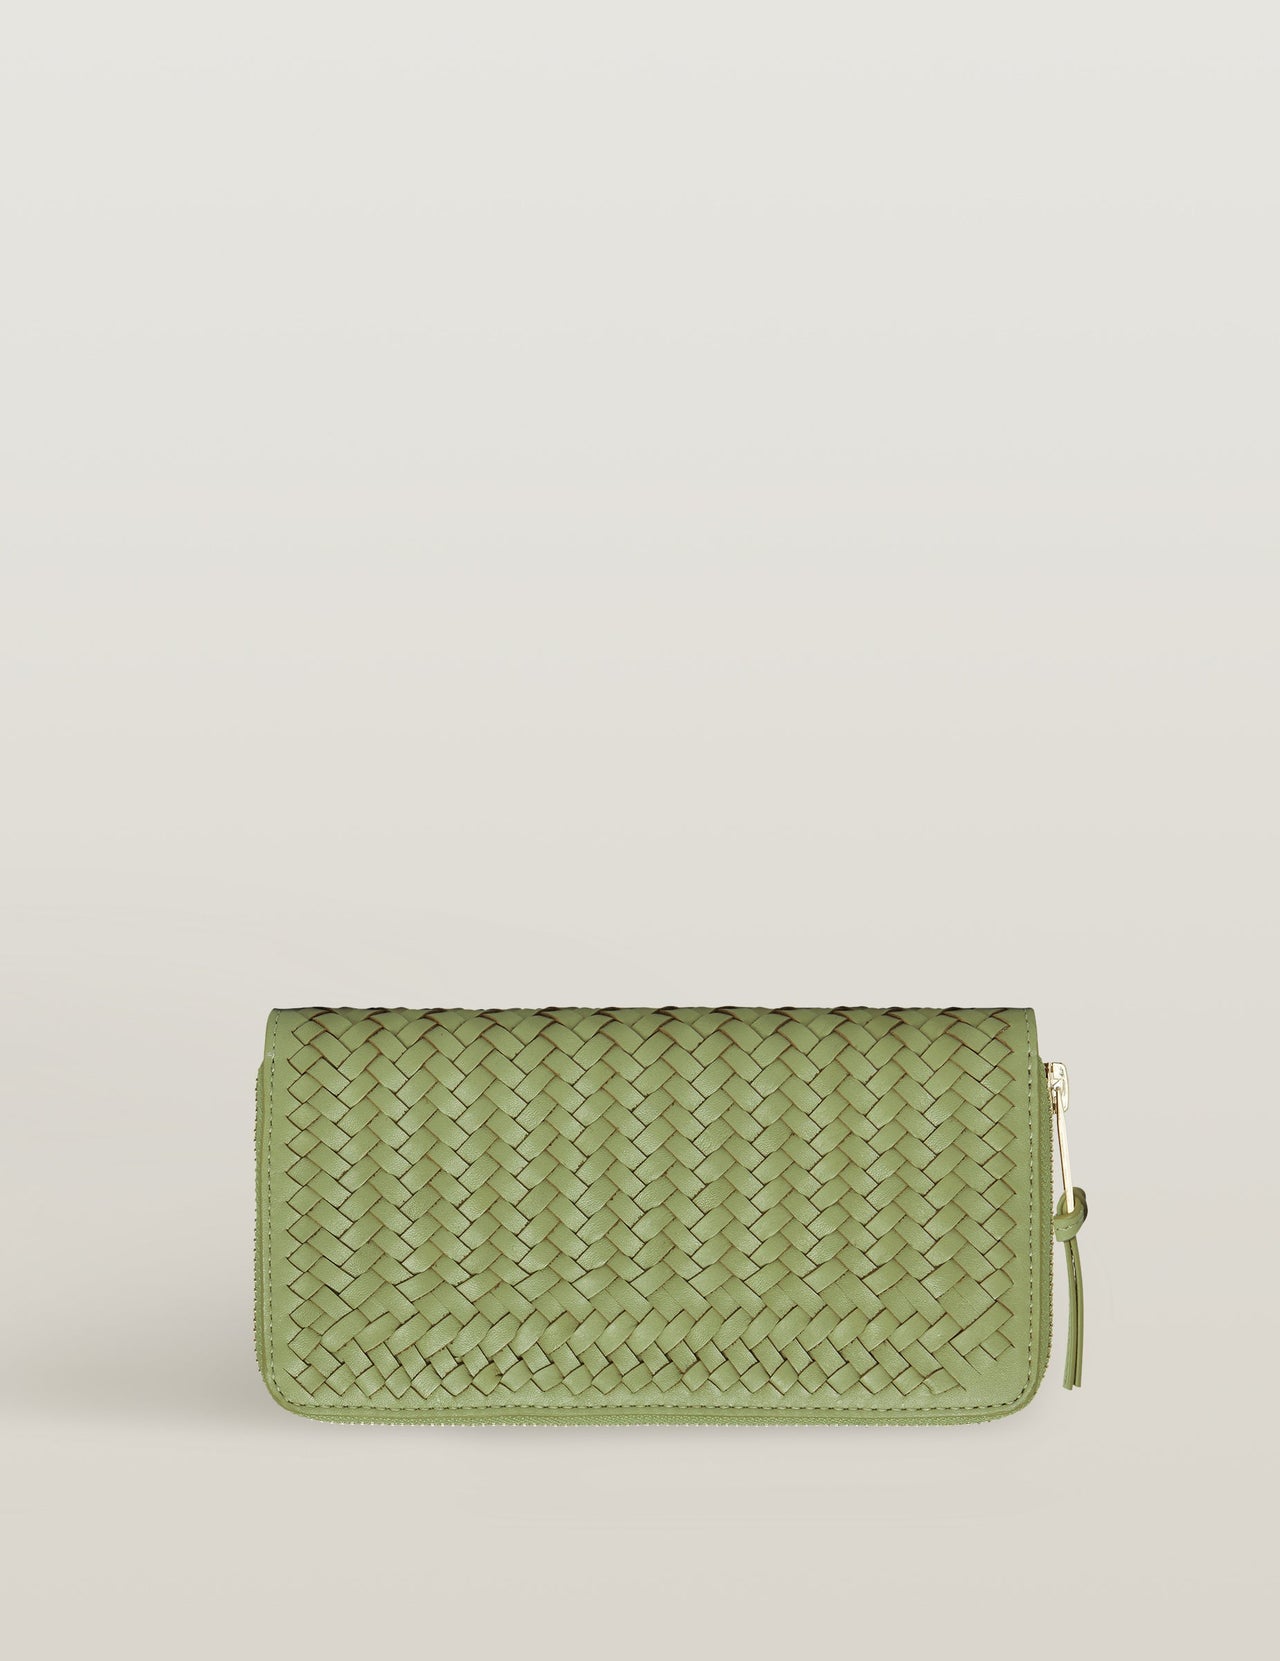  Sage Handwoven Large Leather Wallet 